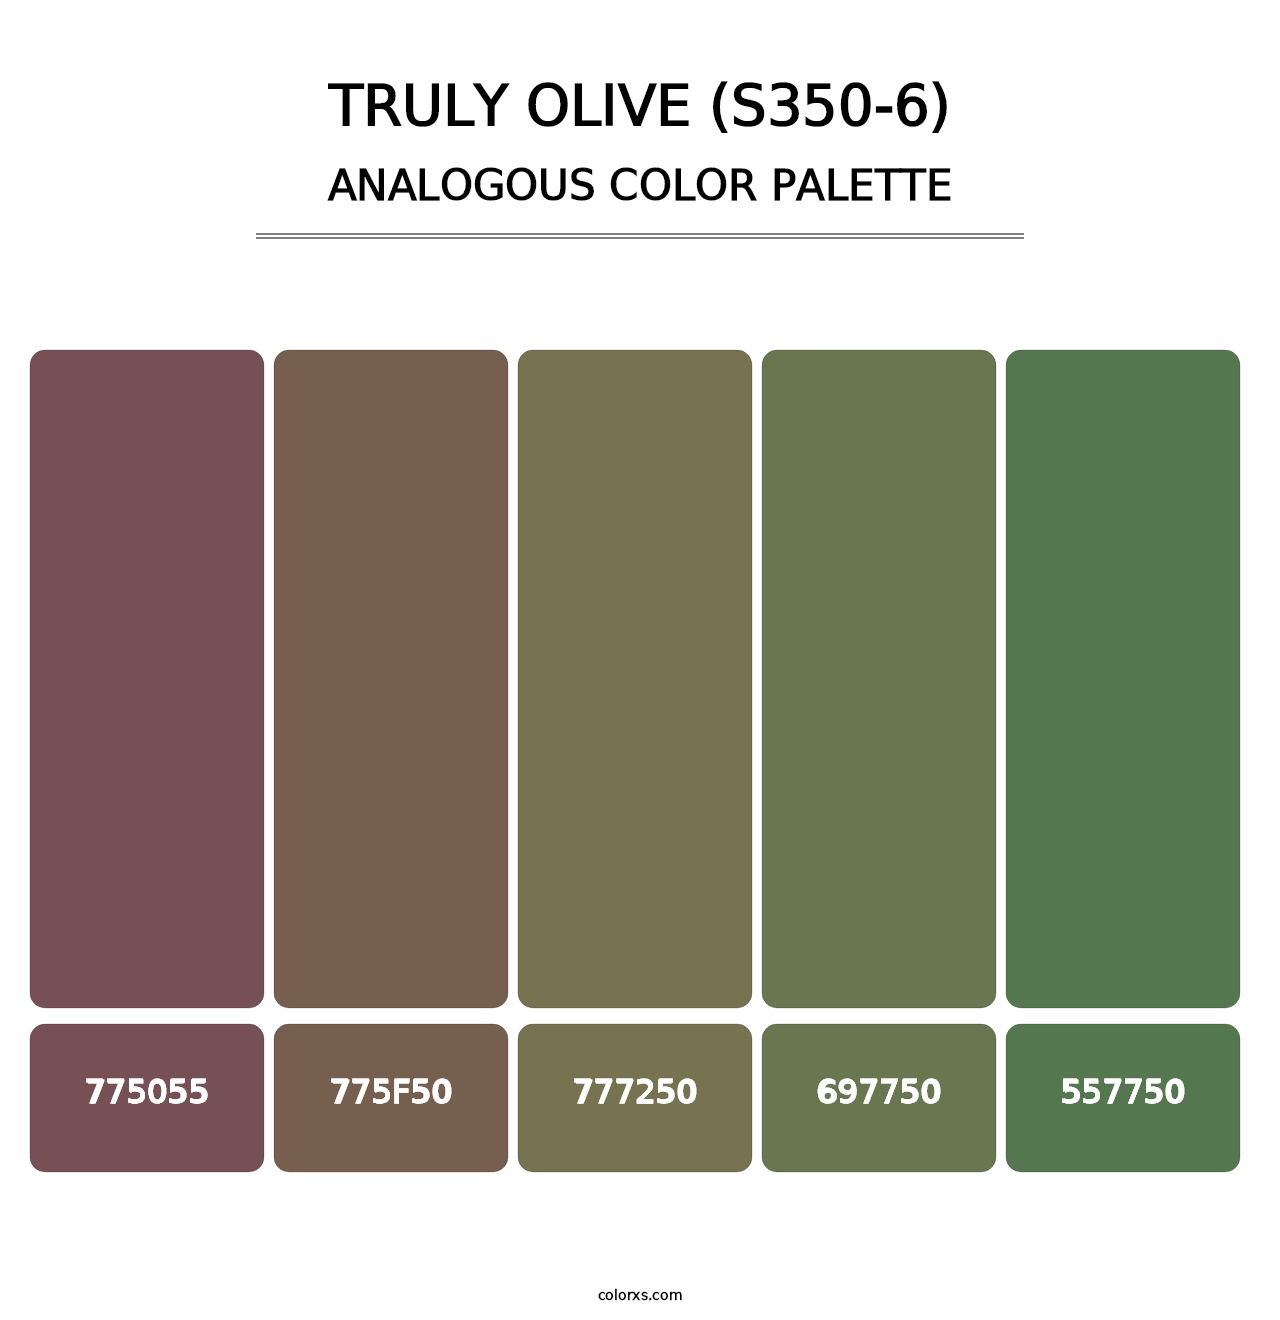 Truly Olive (S350-6) - Analogous Color Palette